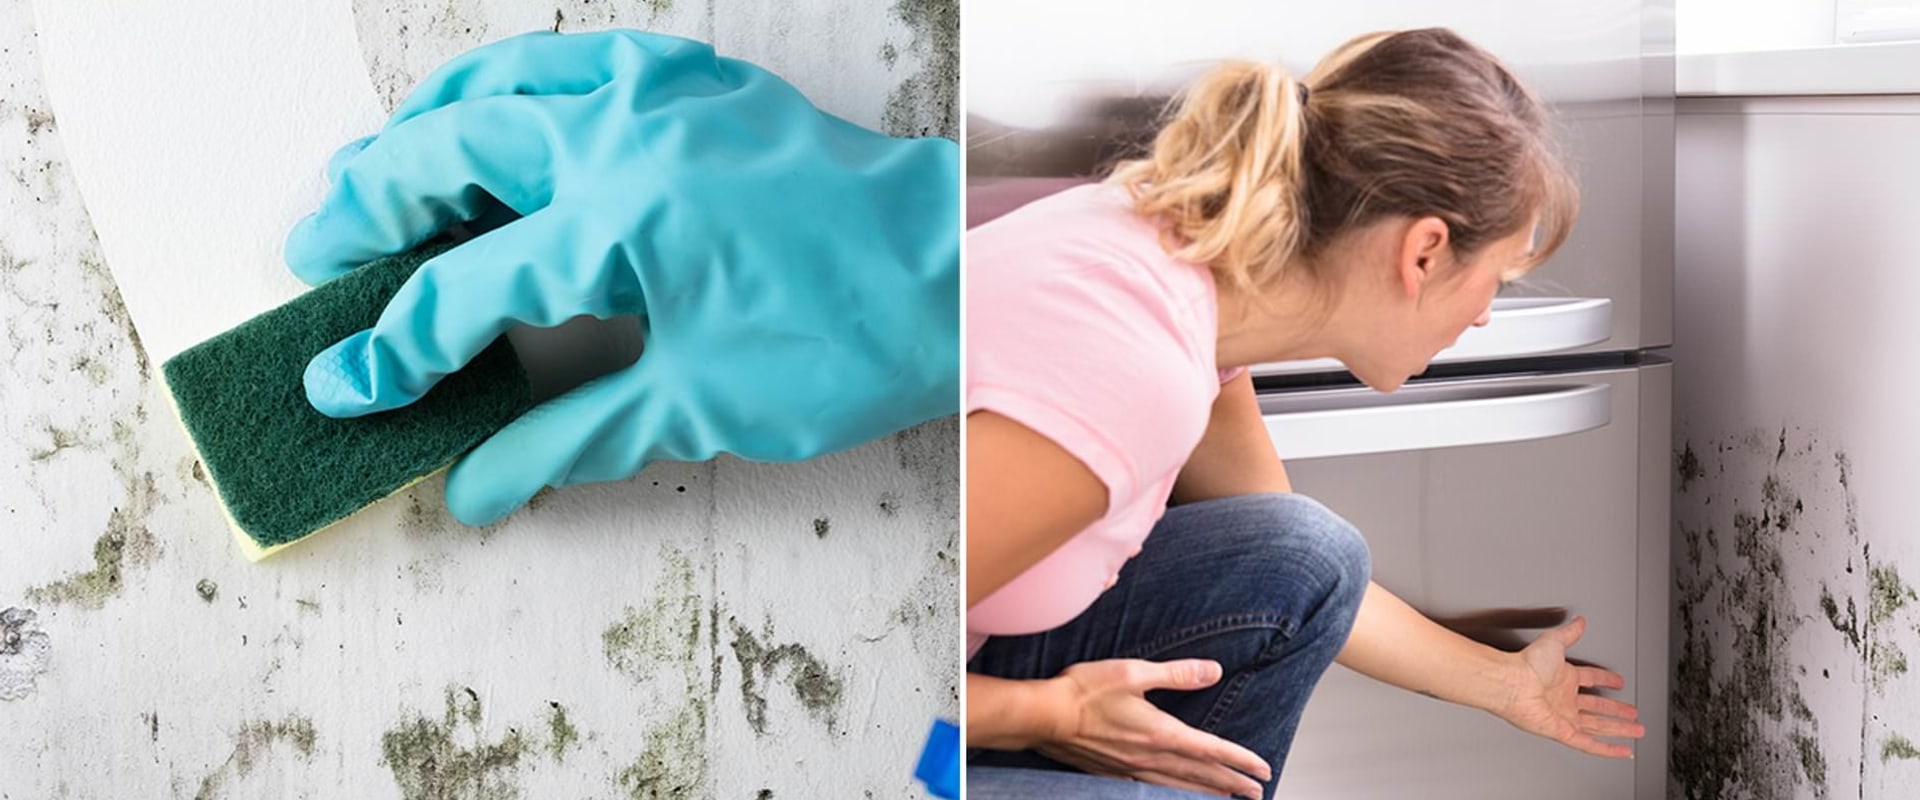 Which is Better to Kill Mold: Bleach or Vinegar?